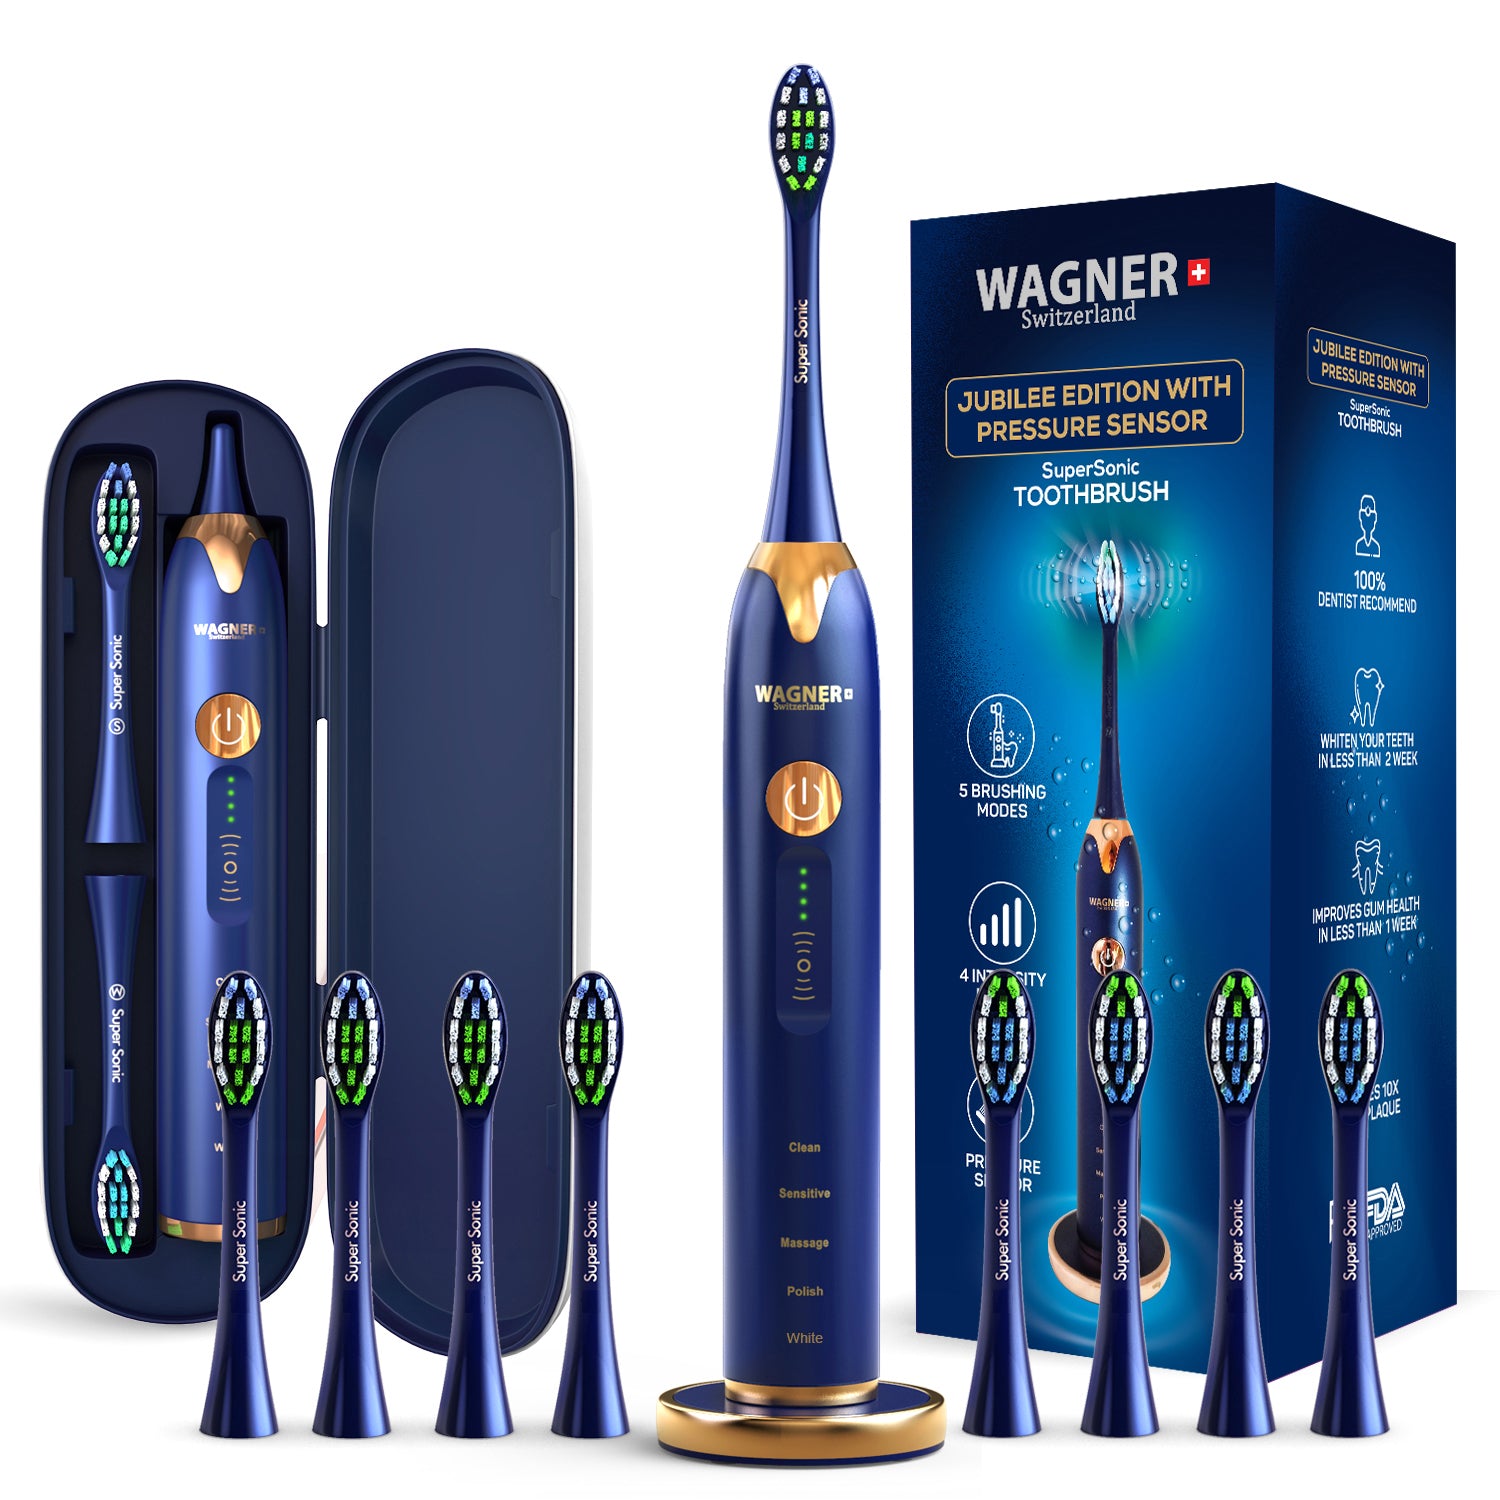 Replacement Toothbrush Brush Heads for Wagner & Stern and Wagner Switzerland toothbrushes.Whiten+ Edition, WT8800 Series and Duette series only. (Blue)